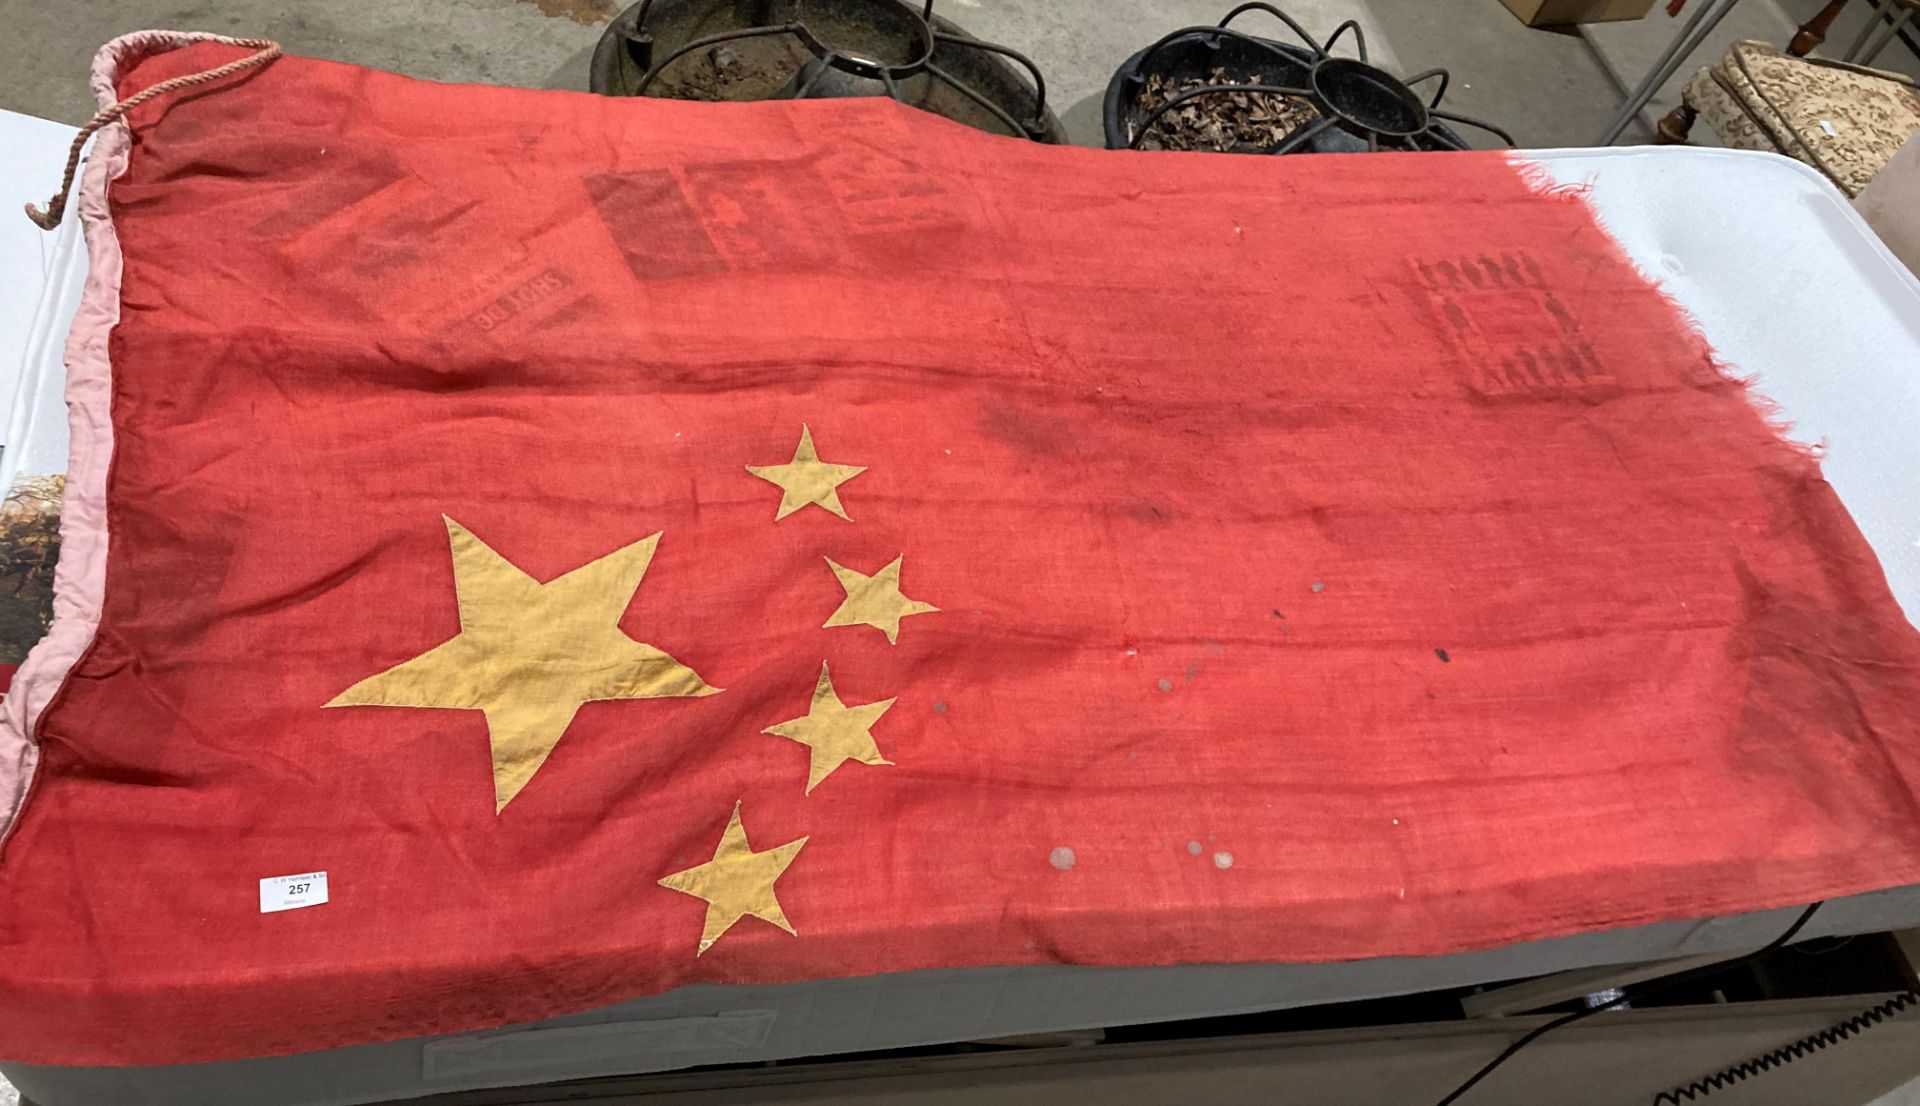 A Chinese Merchant Shipping flag - 120cm x 160cm - (slight tears due to constant flapping in the